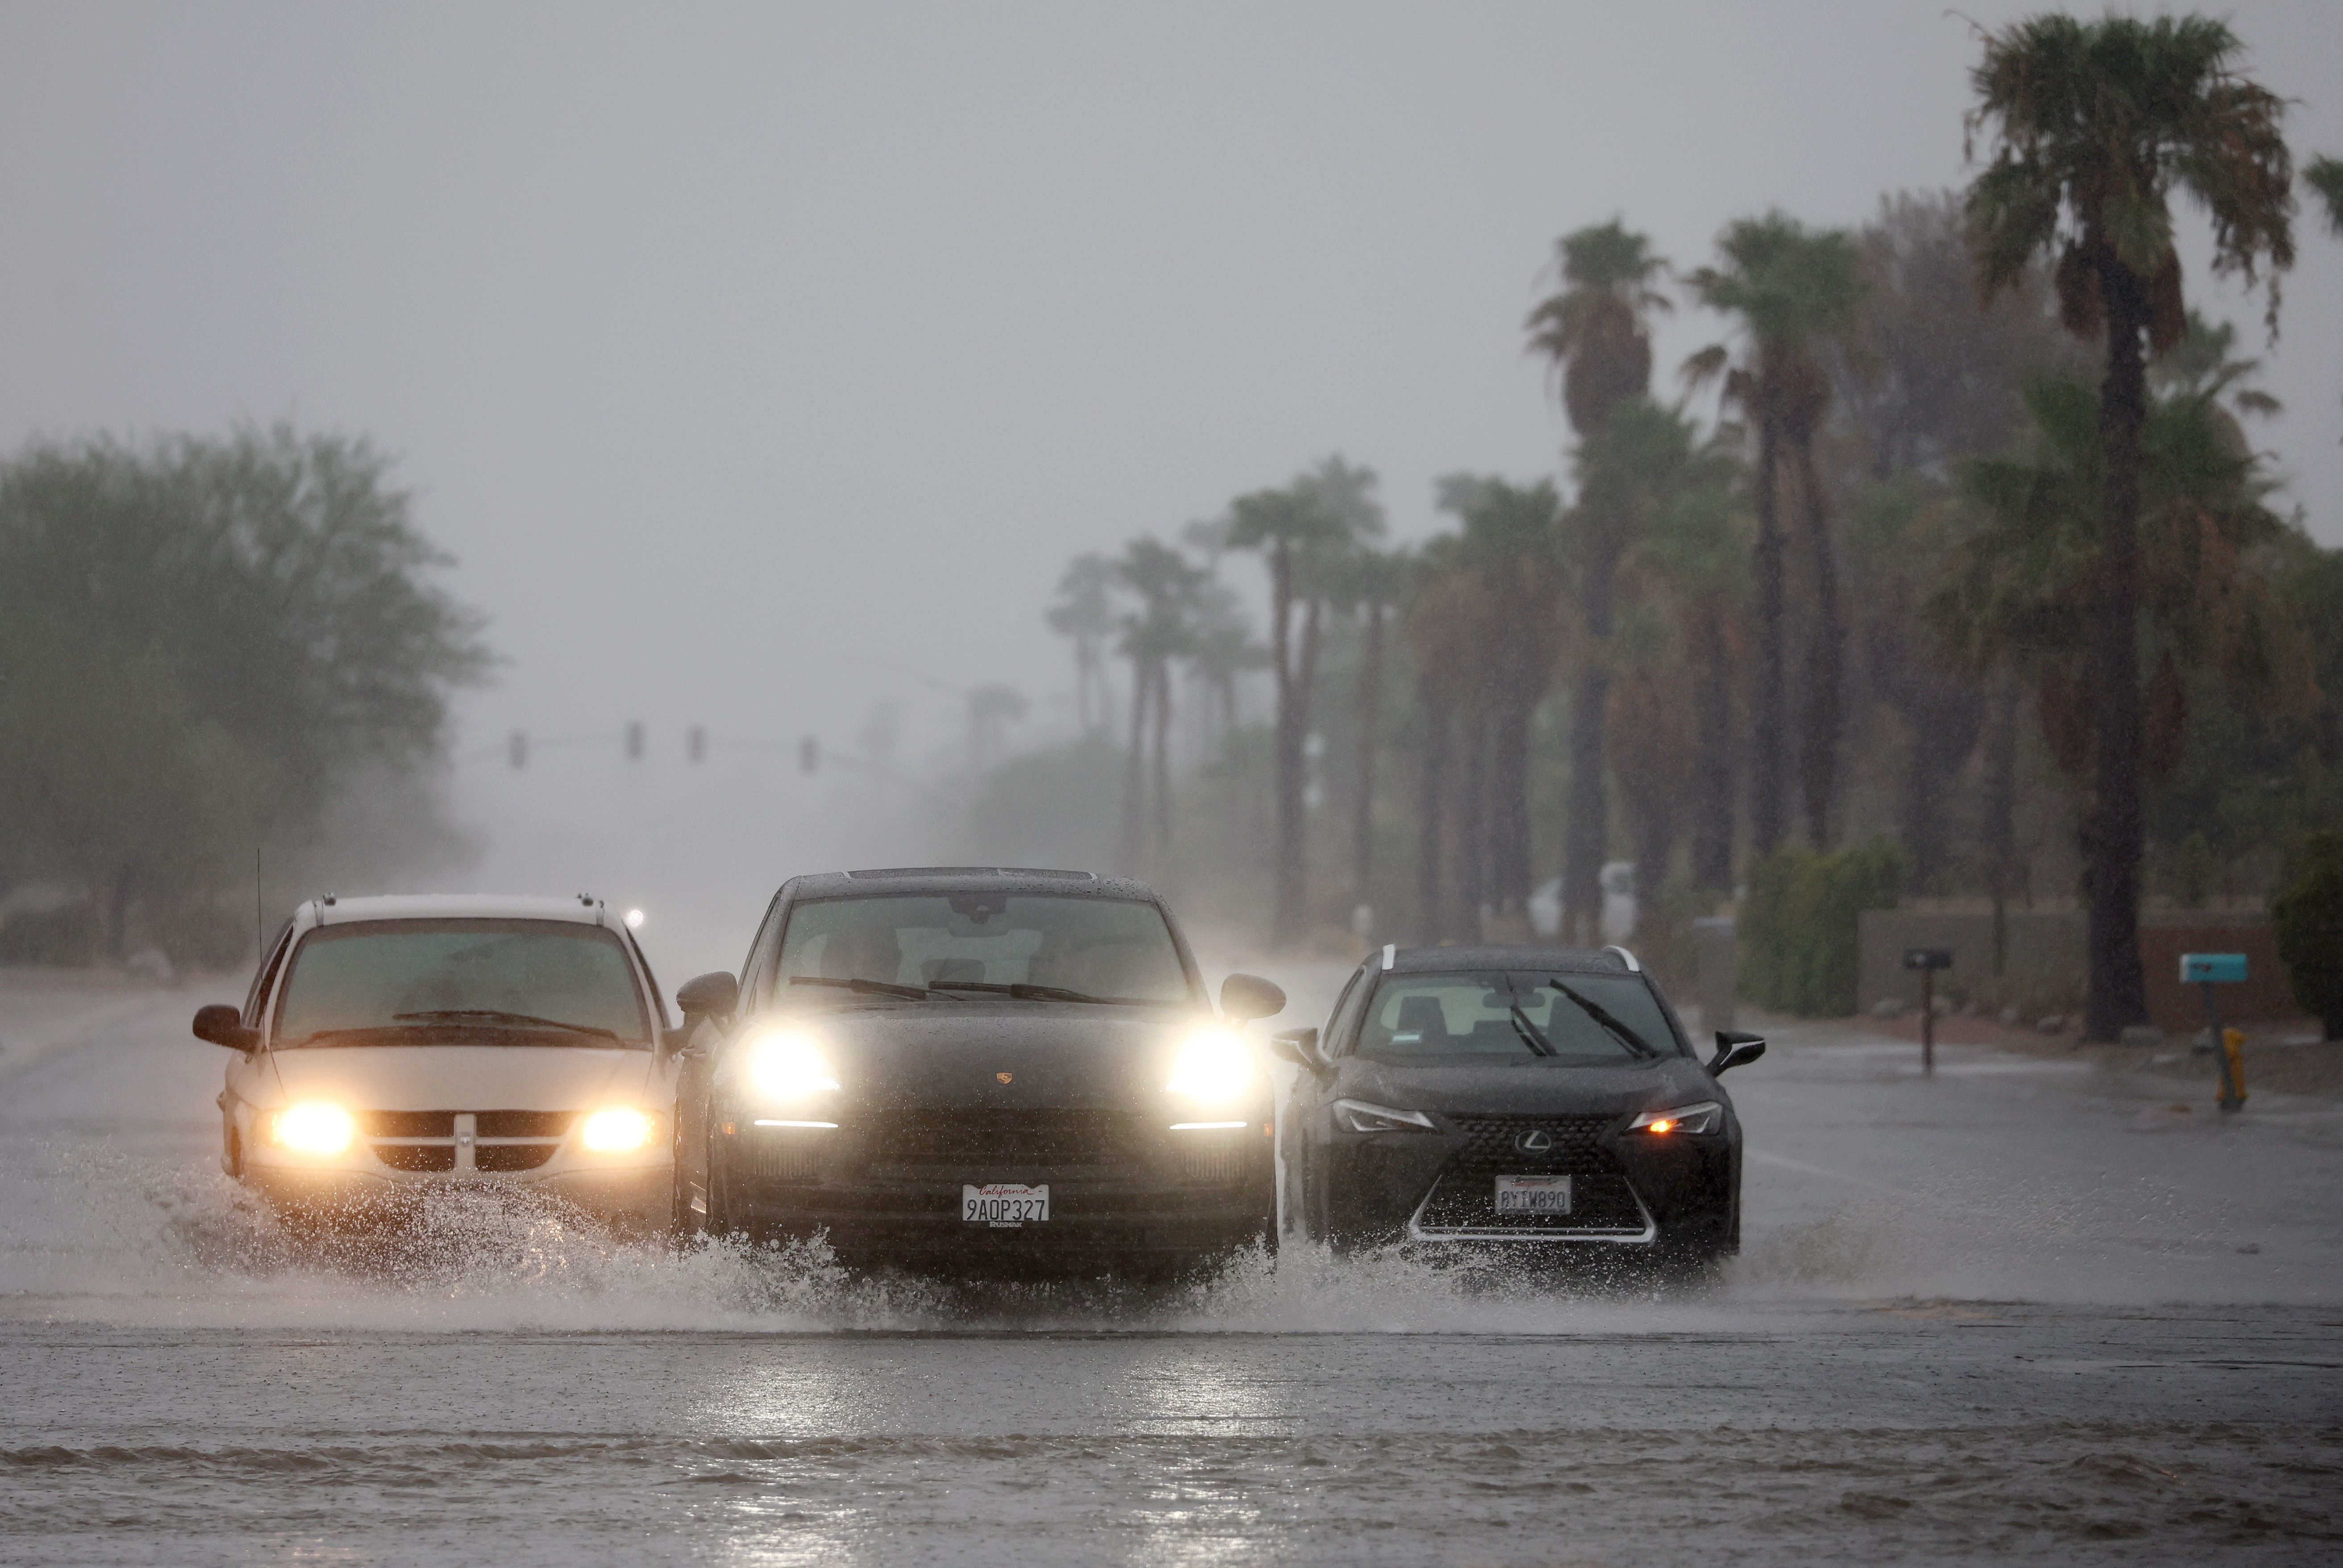 Vehicles drive along a flooded street as Tropical Storm Hilary approaches on August 20, 2023 in Palm Springs, California. Southern California is under a first-ever tropical storm warning as Hilary nears, with parts of California, Arizona and Nevada preparing for flooding and heavy rains. All California state beaches have been closed in San Diego and Orange counties in preparation for the impacts from the storm, which was downgraded from hurricane status. 